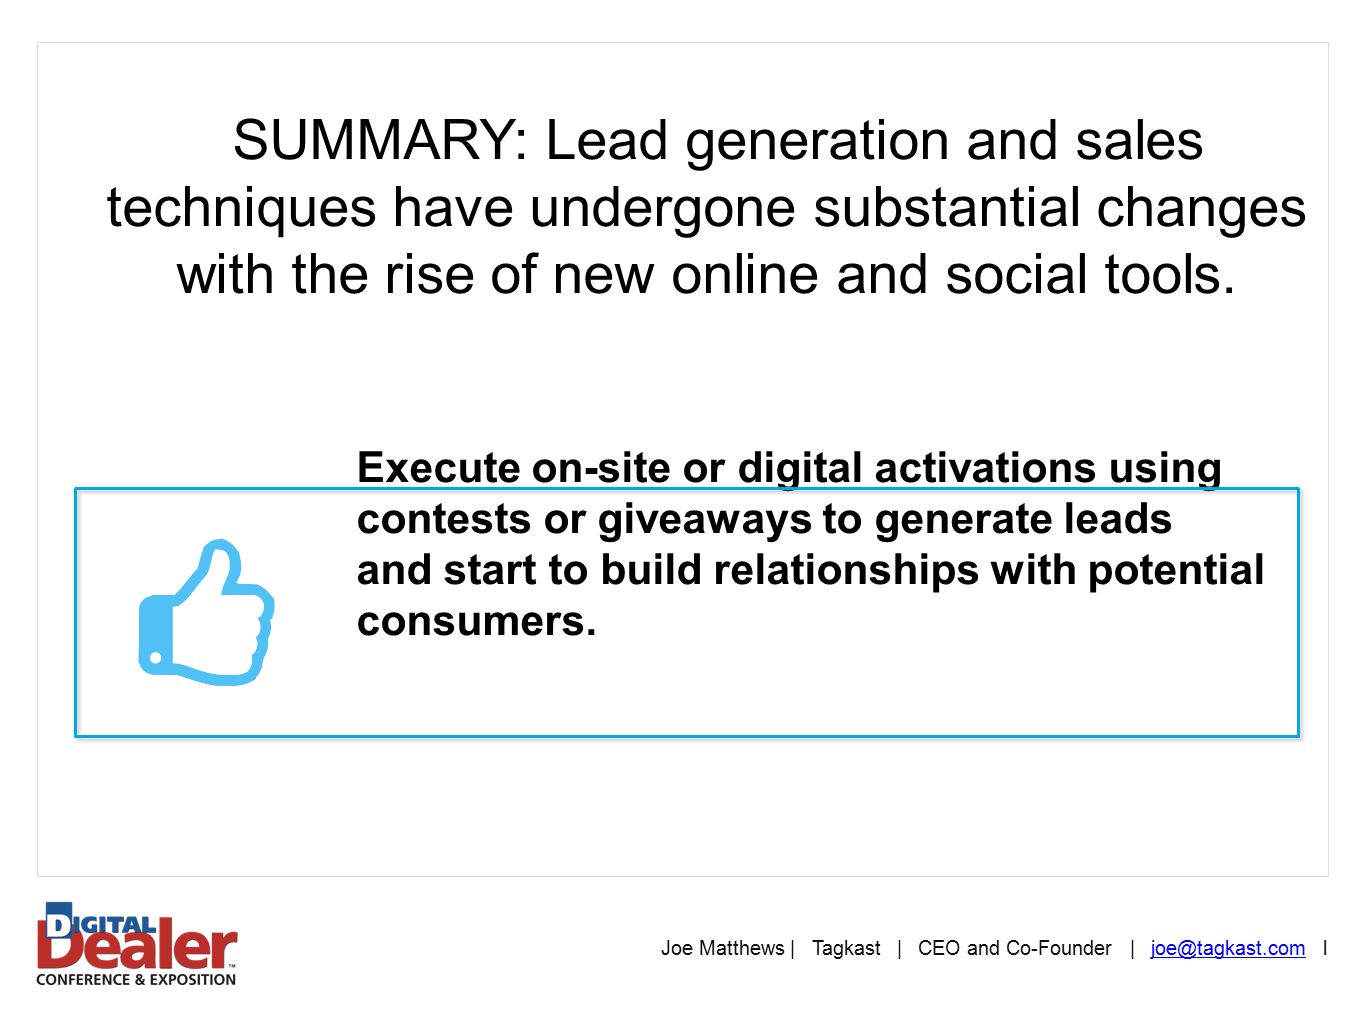 SUMMARY: Lead generation and sales techniques have undergone substantial changes with the rise of new online and social tools.